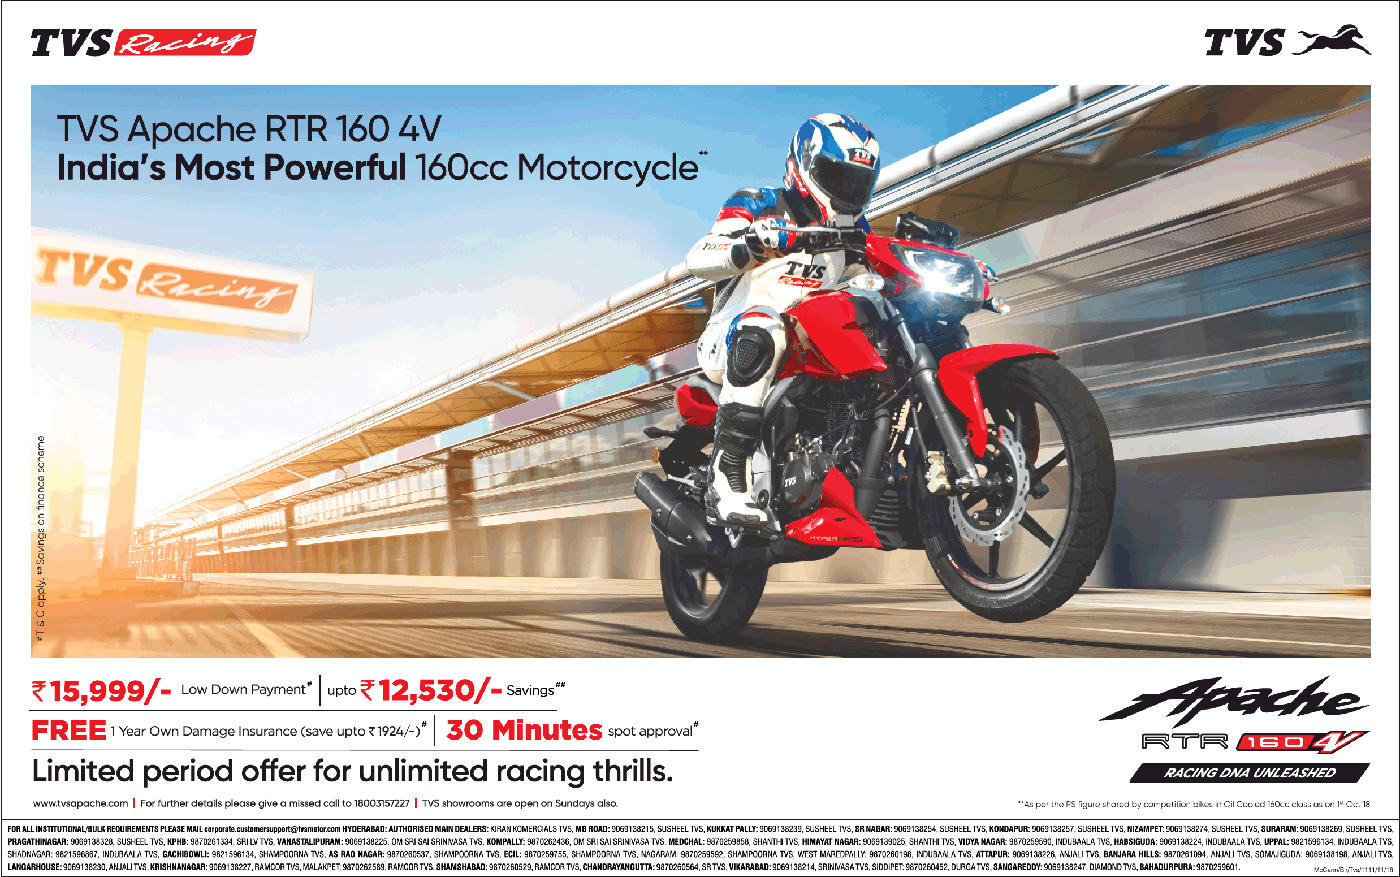 tvs-apache-rtr-160-indias-most-powerful-bike-ad-times-of-india-hyderabad-24-11-2018.png